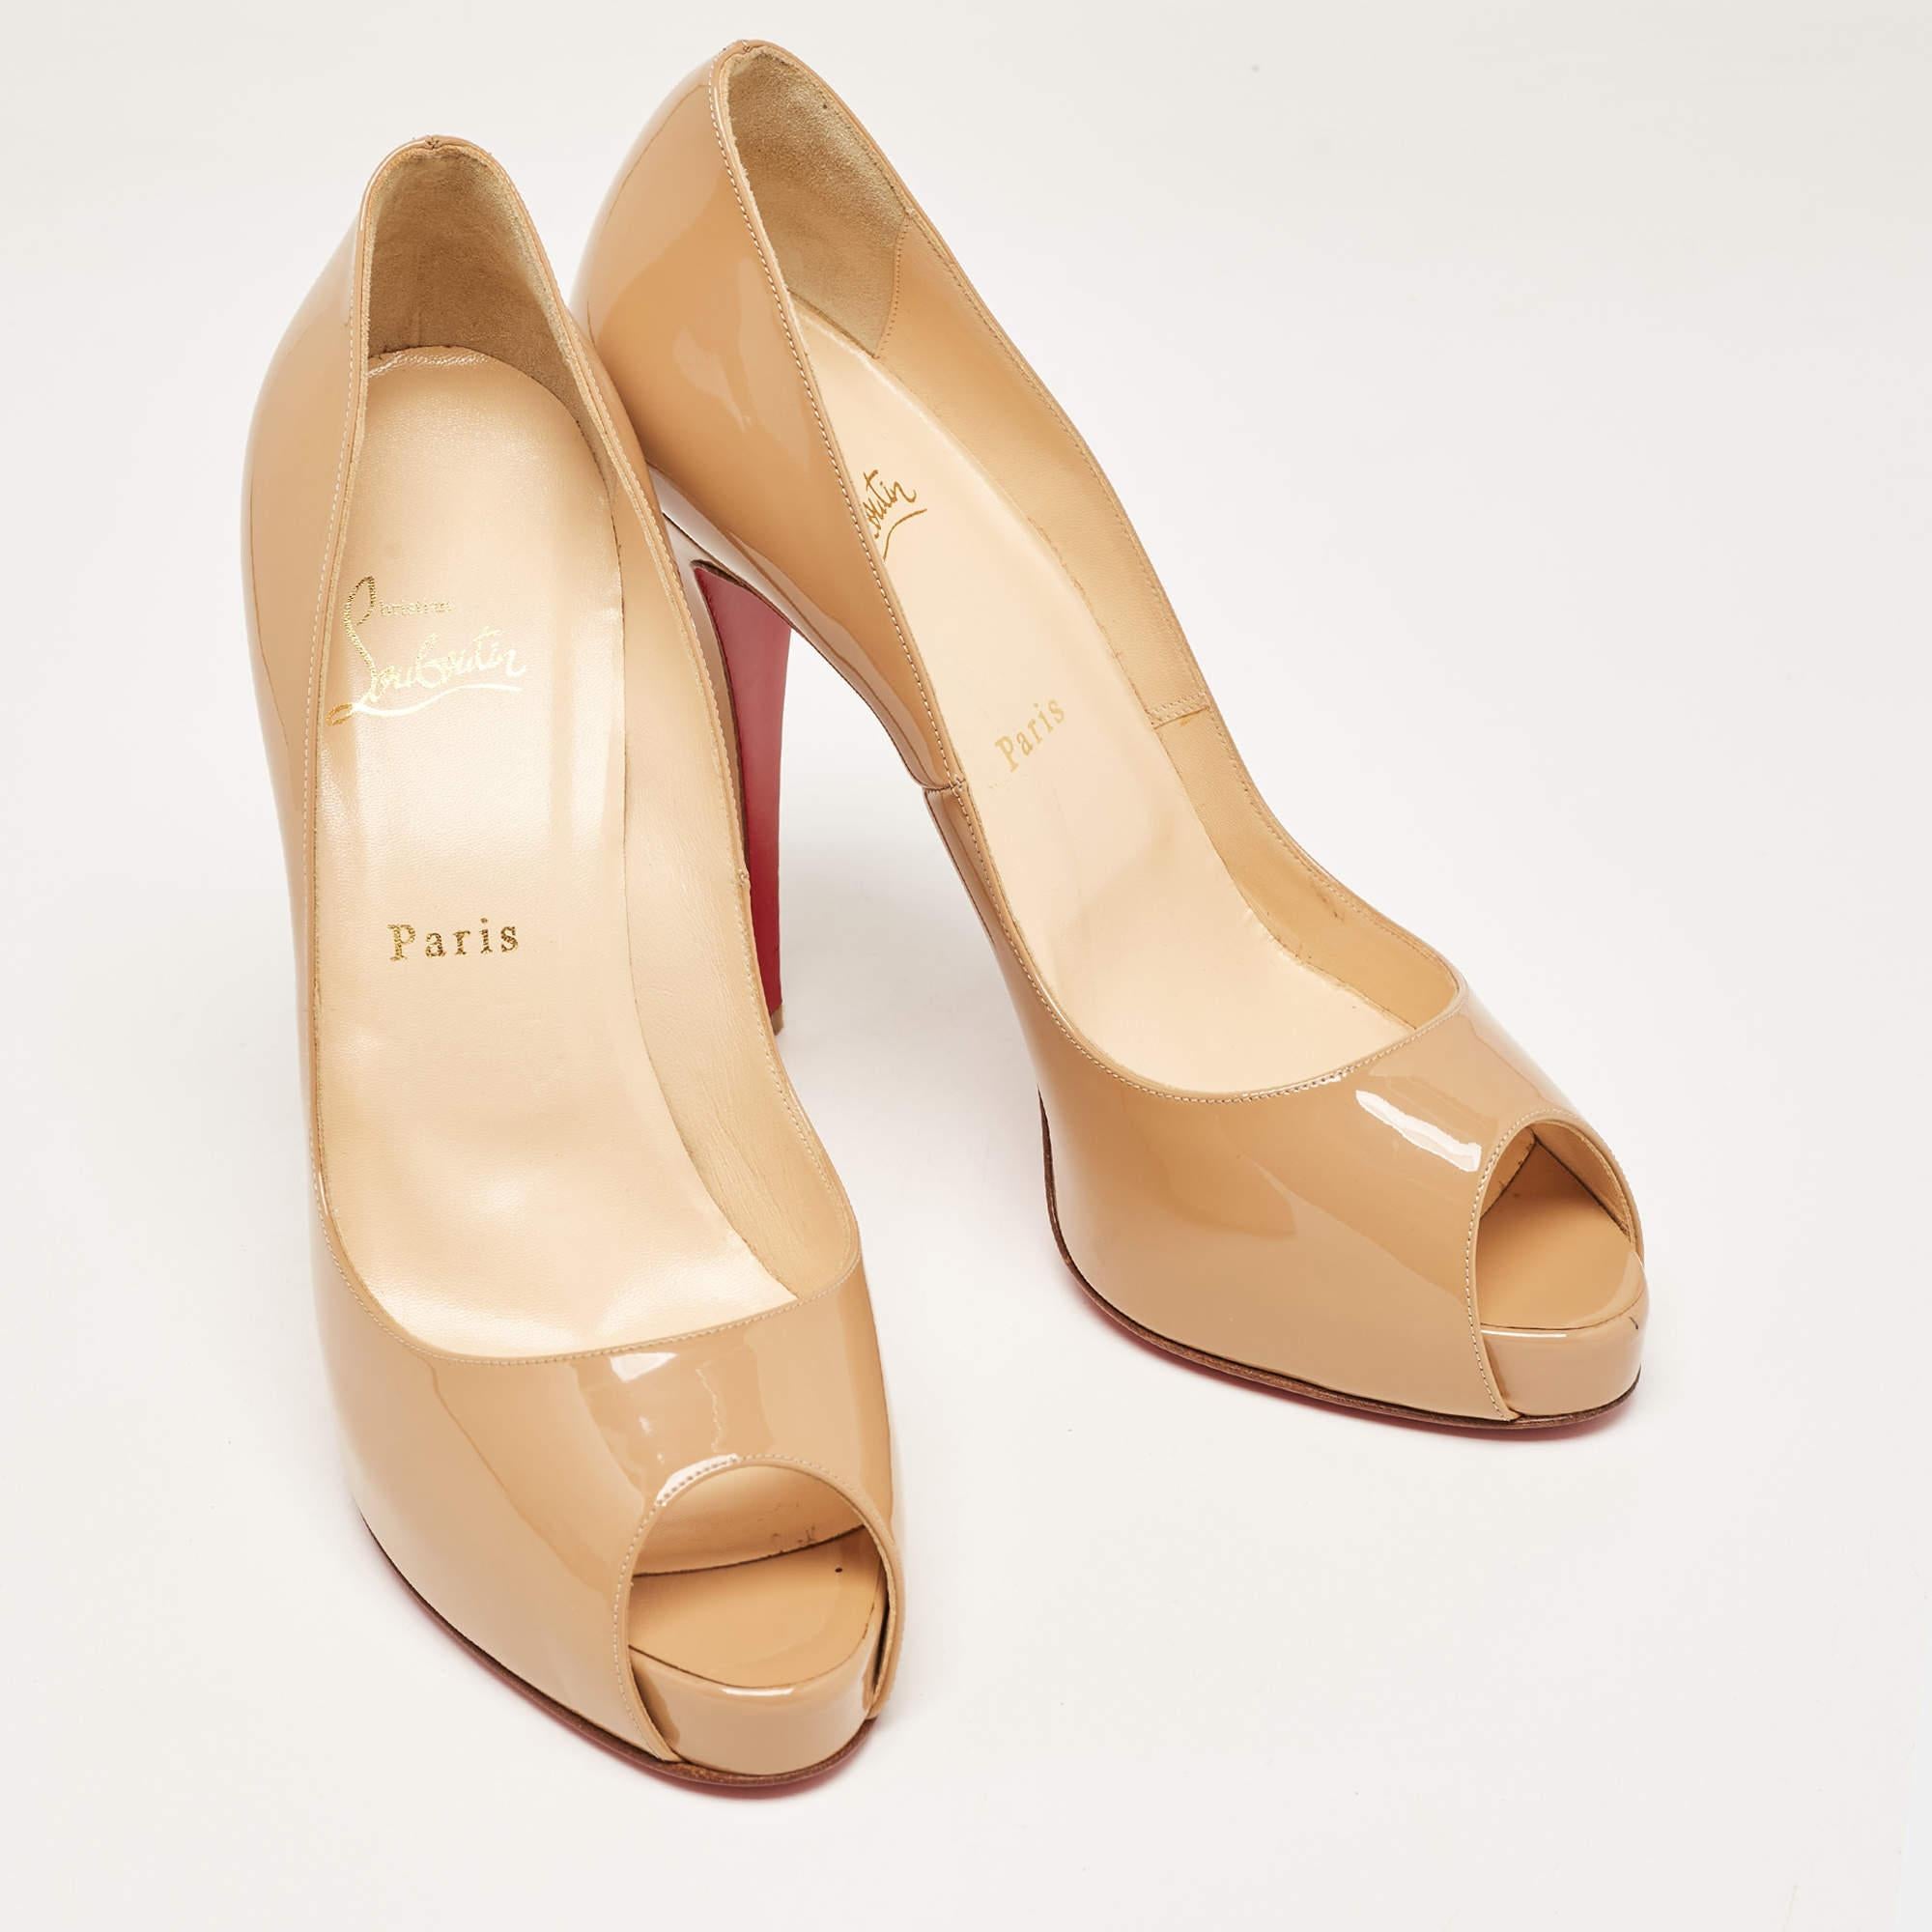 Christian Louboutin Beige Patent Leather Very Prive Pumps Size 41 2